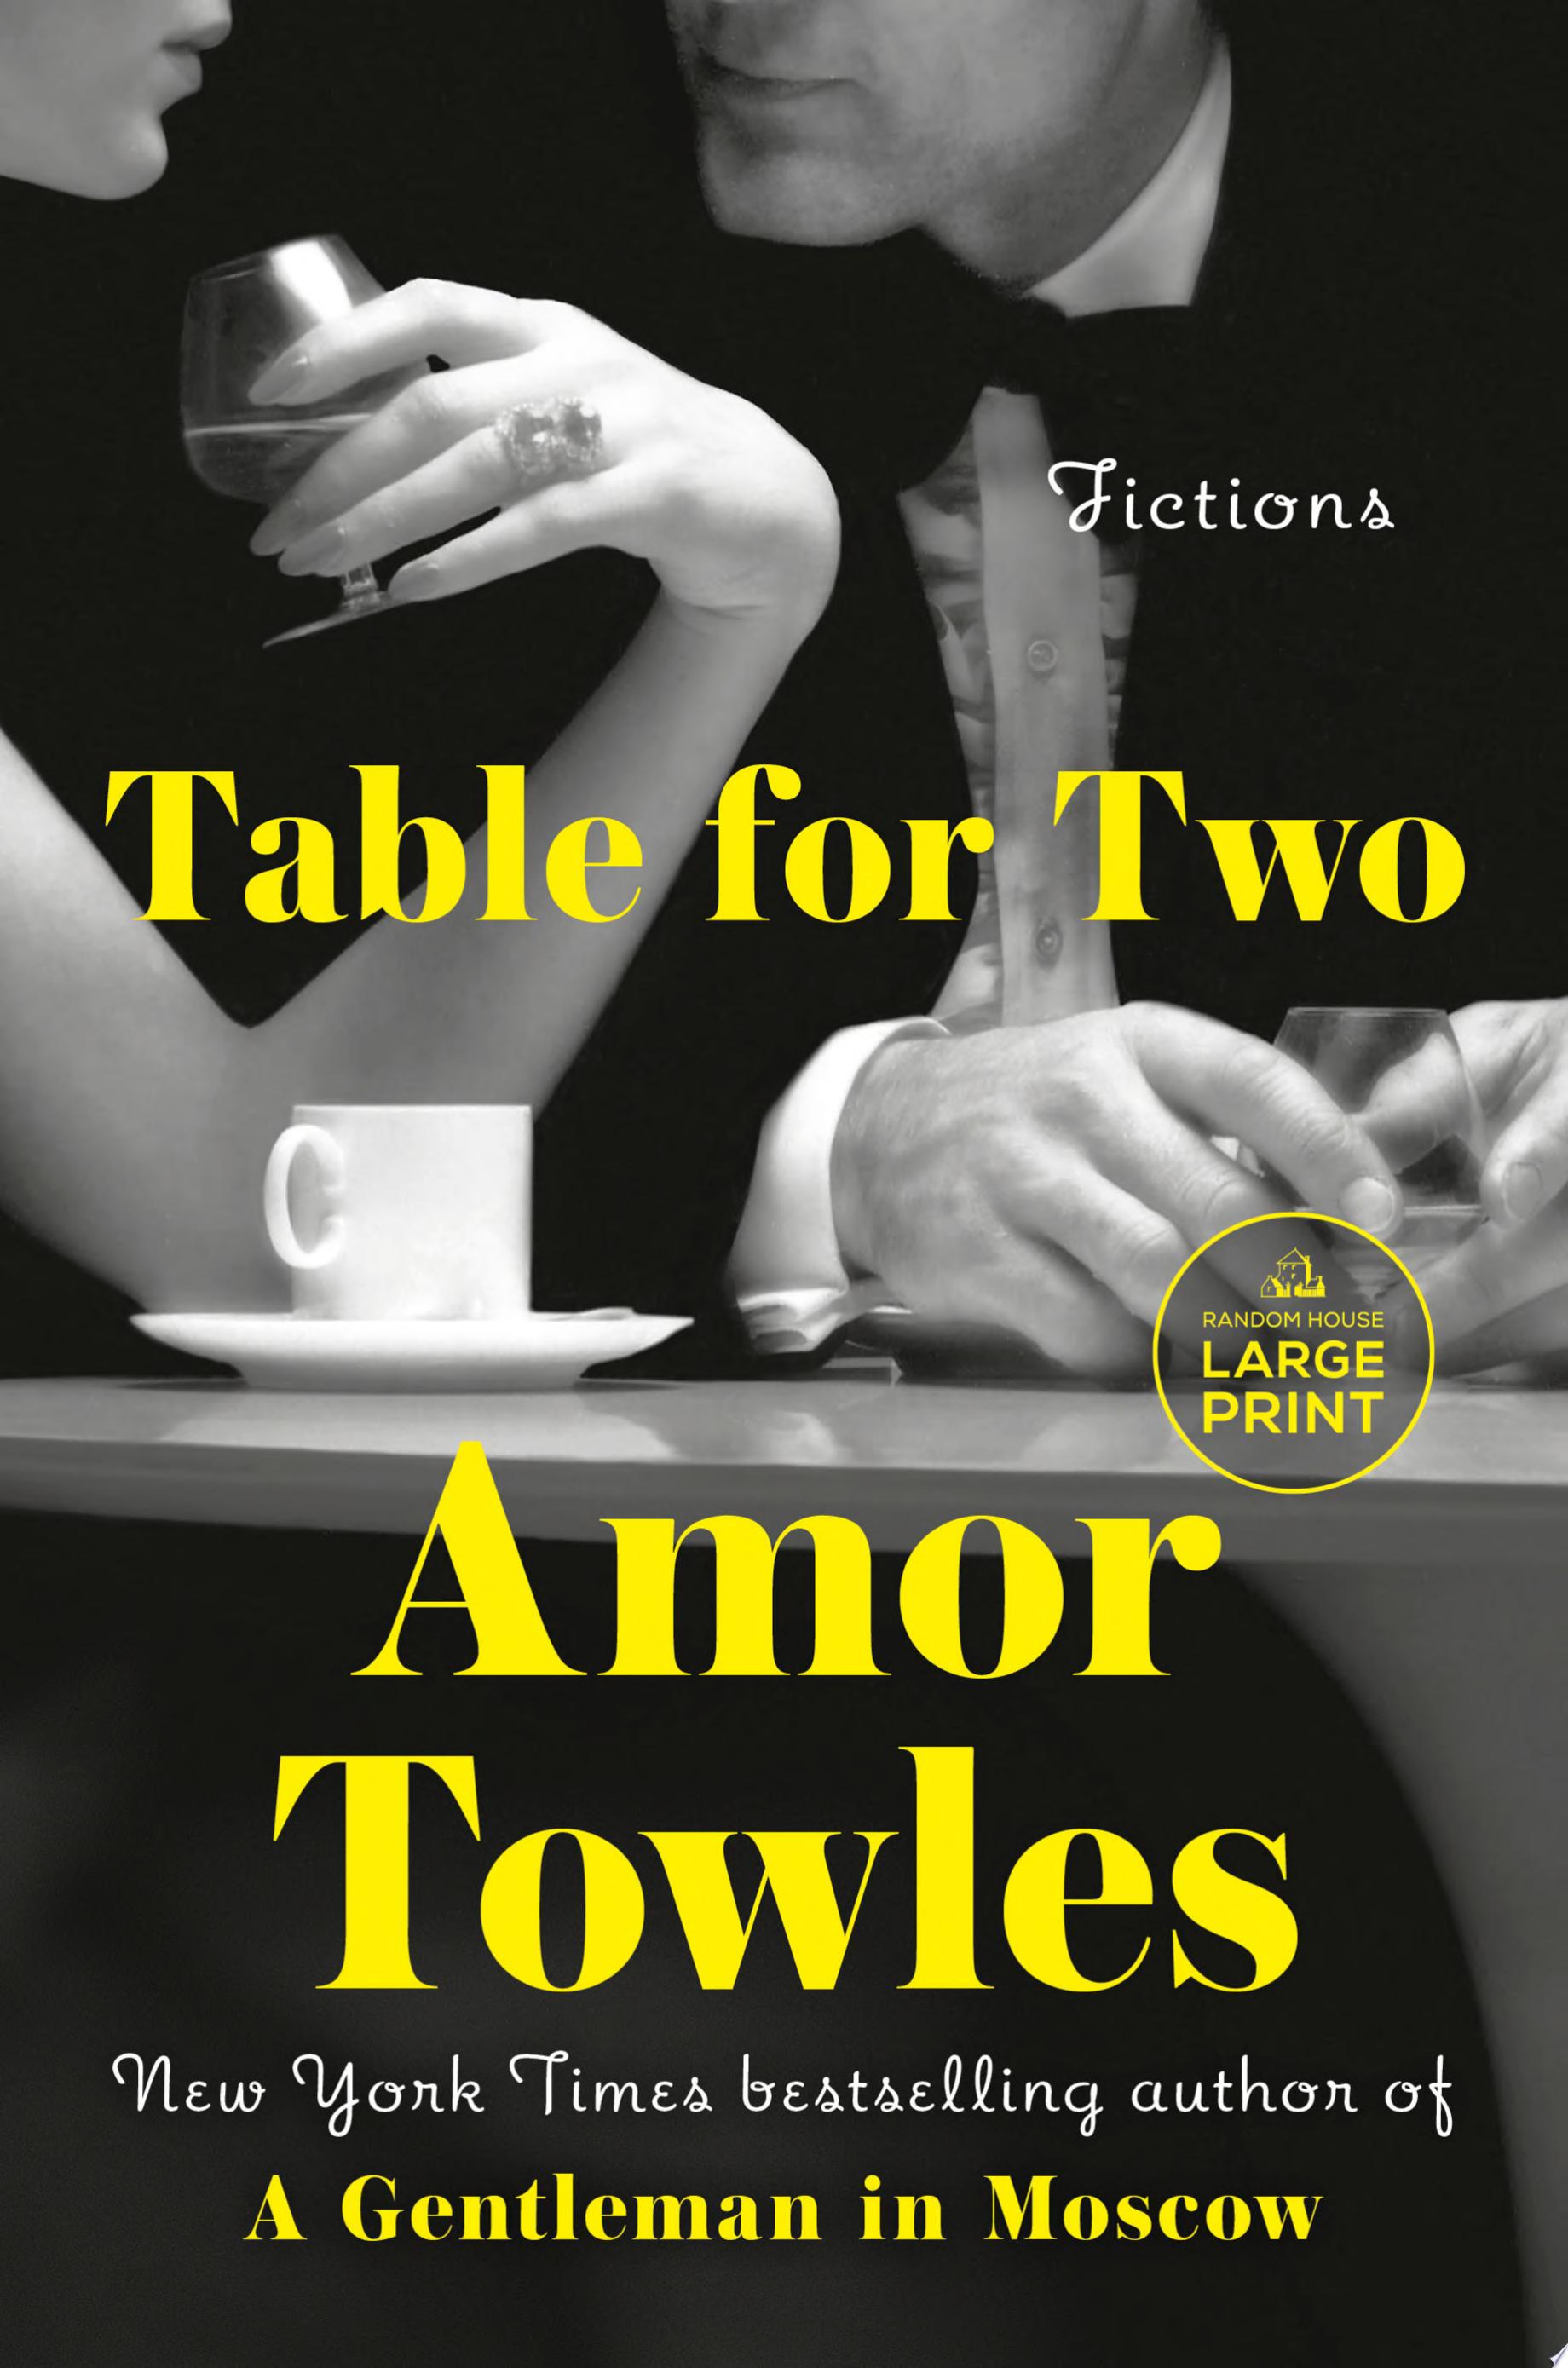 Image for "Table for Two"